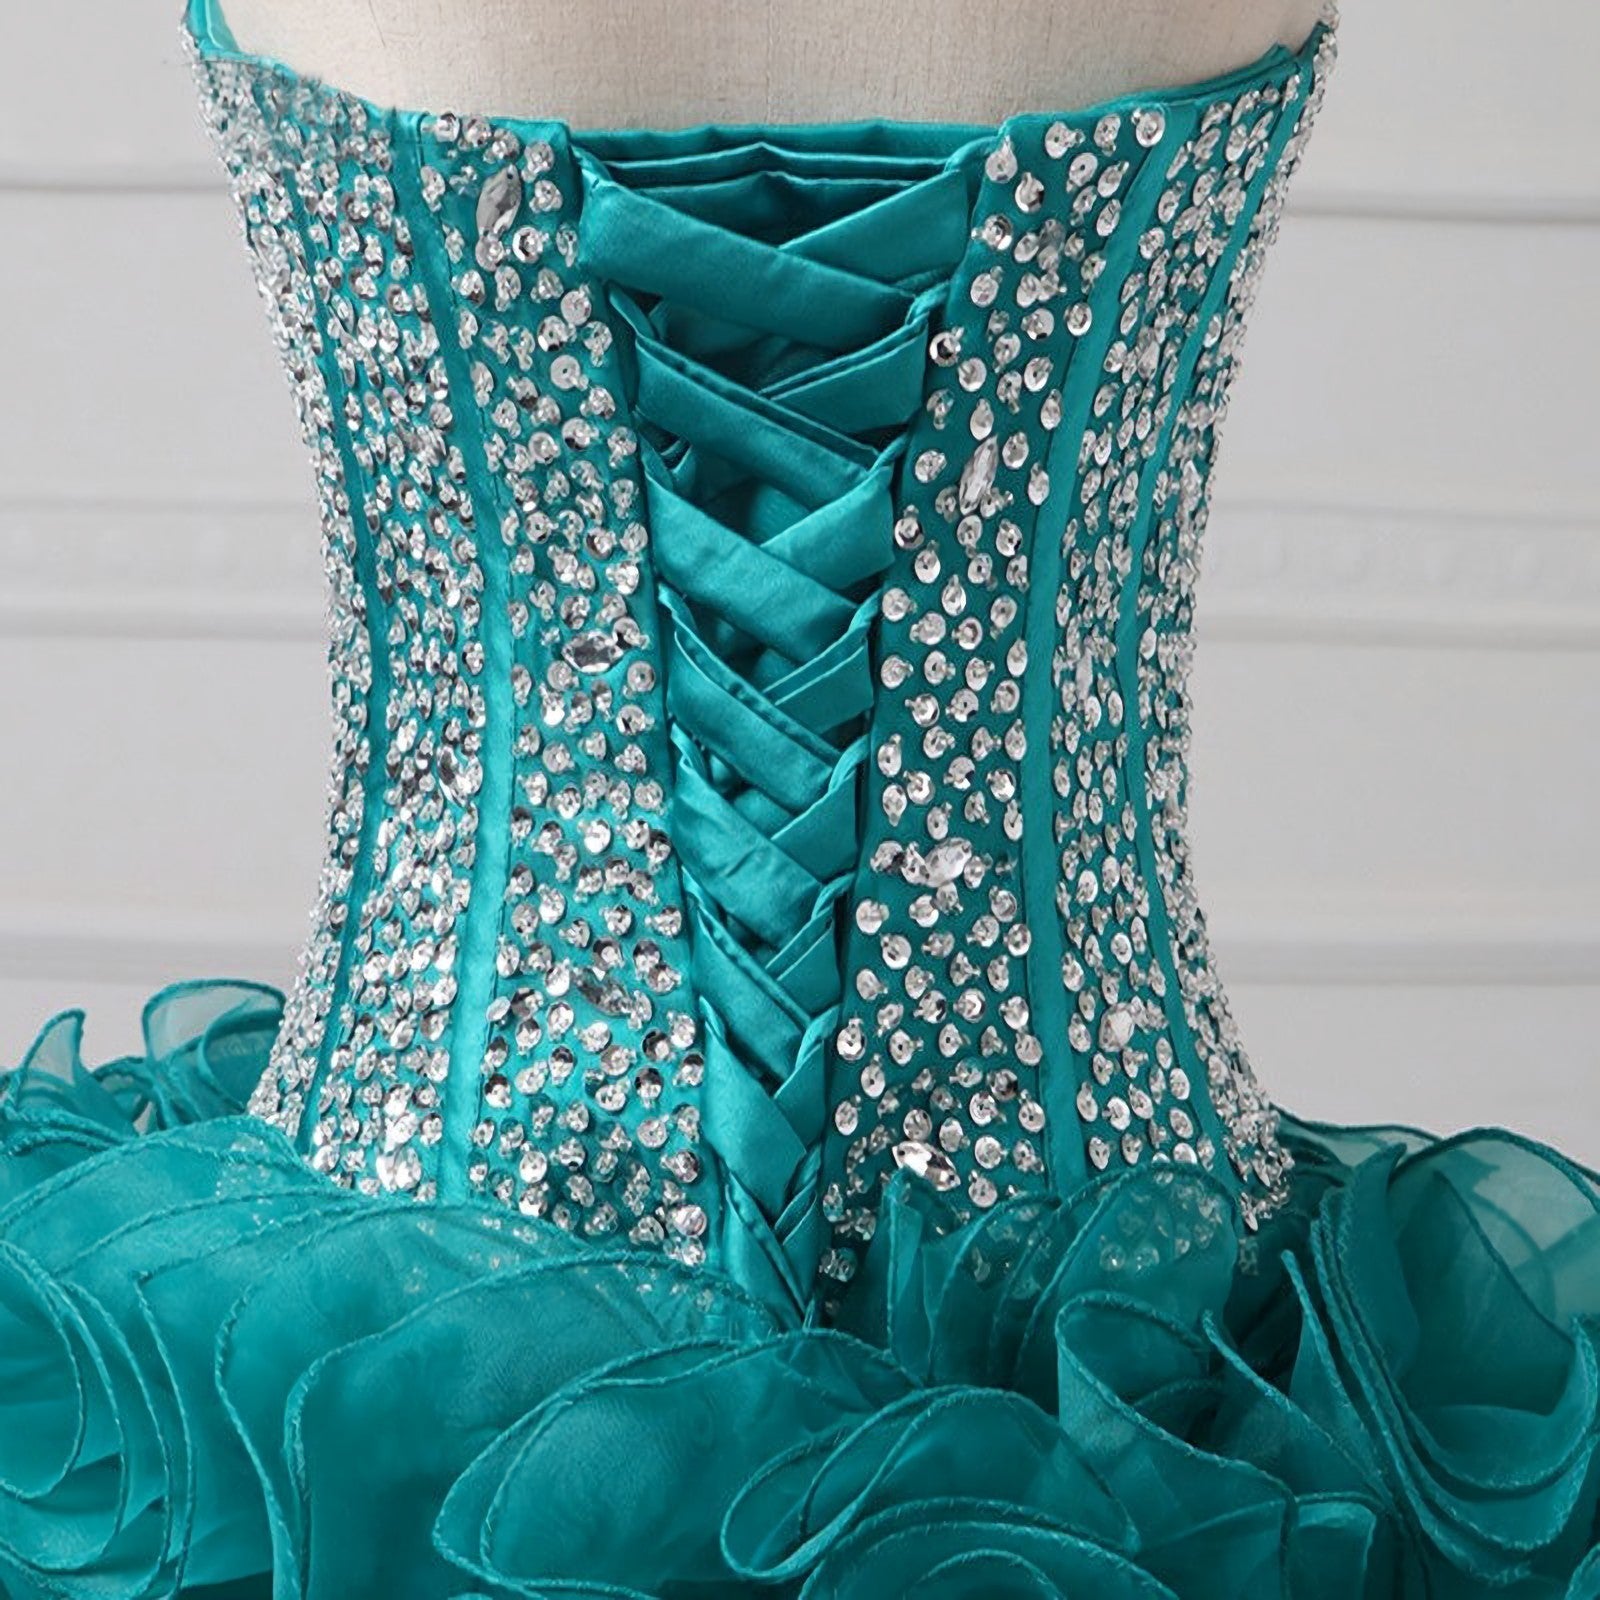 Formal Dress For Weddings, Ruffles Strapless Sweetheart Backless Rhinestone Organza Teal Homecoming Dresses